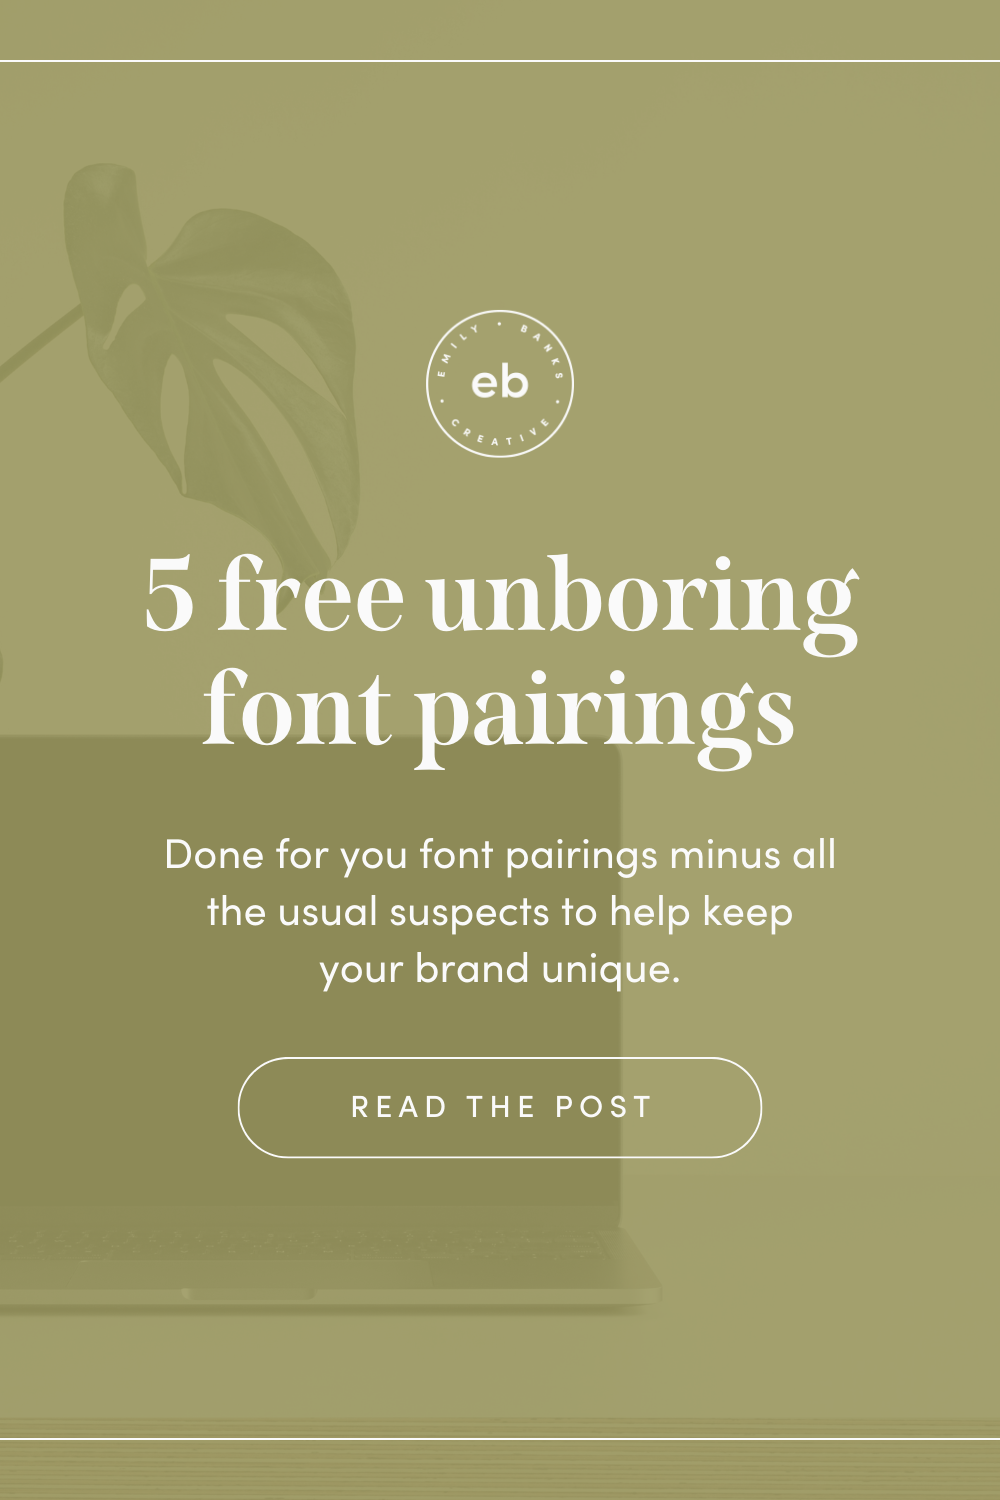 Done for you font pairings minus all the usual suspects to help keep your brand unique.